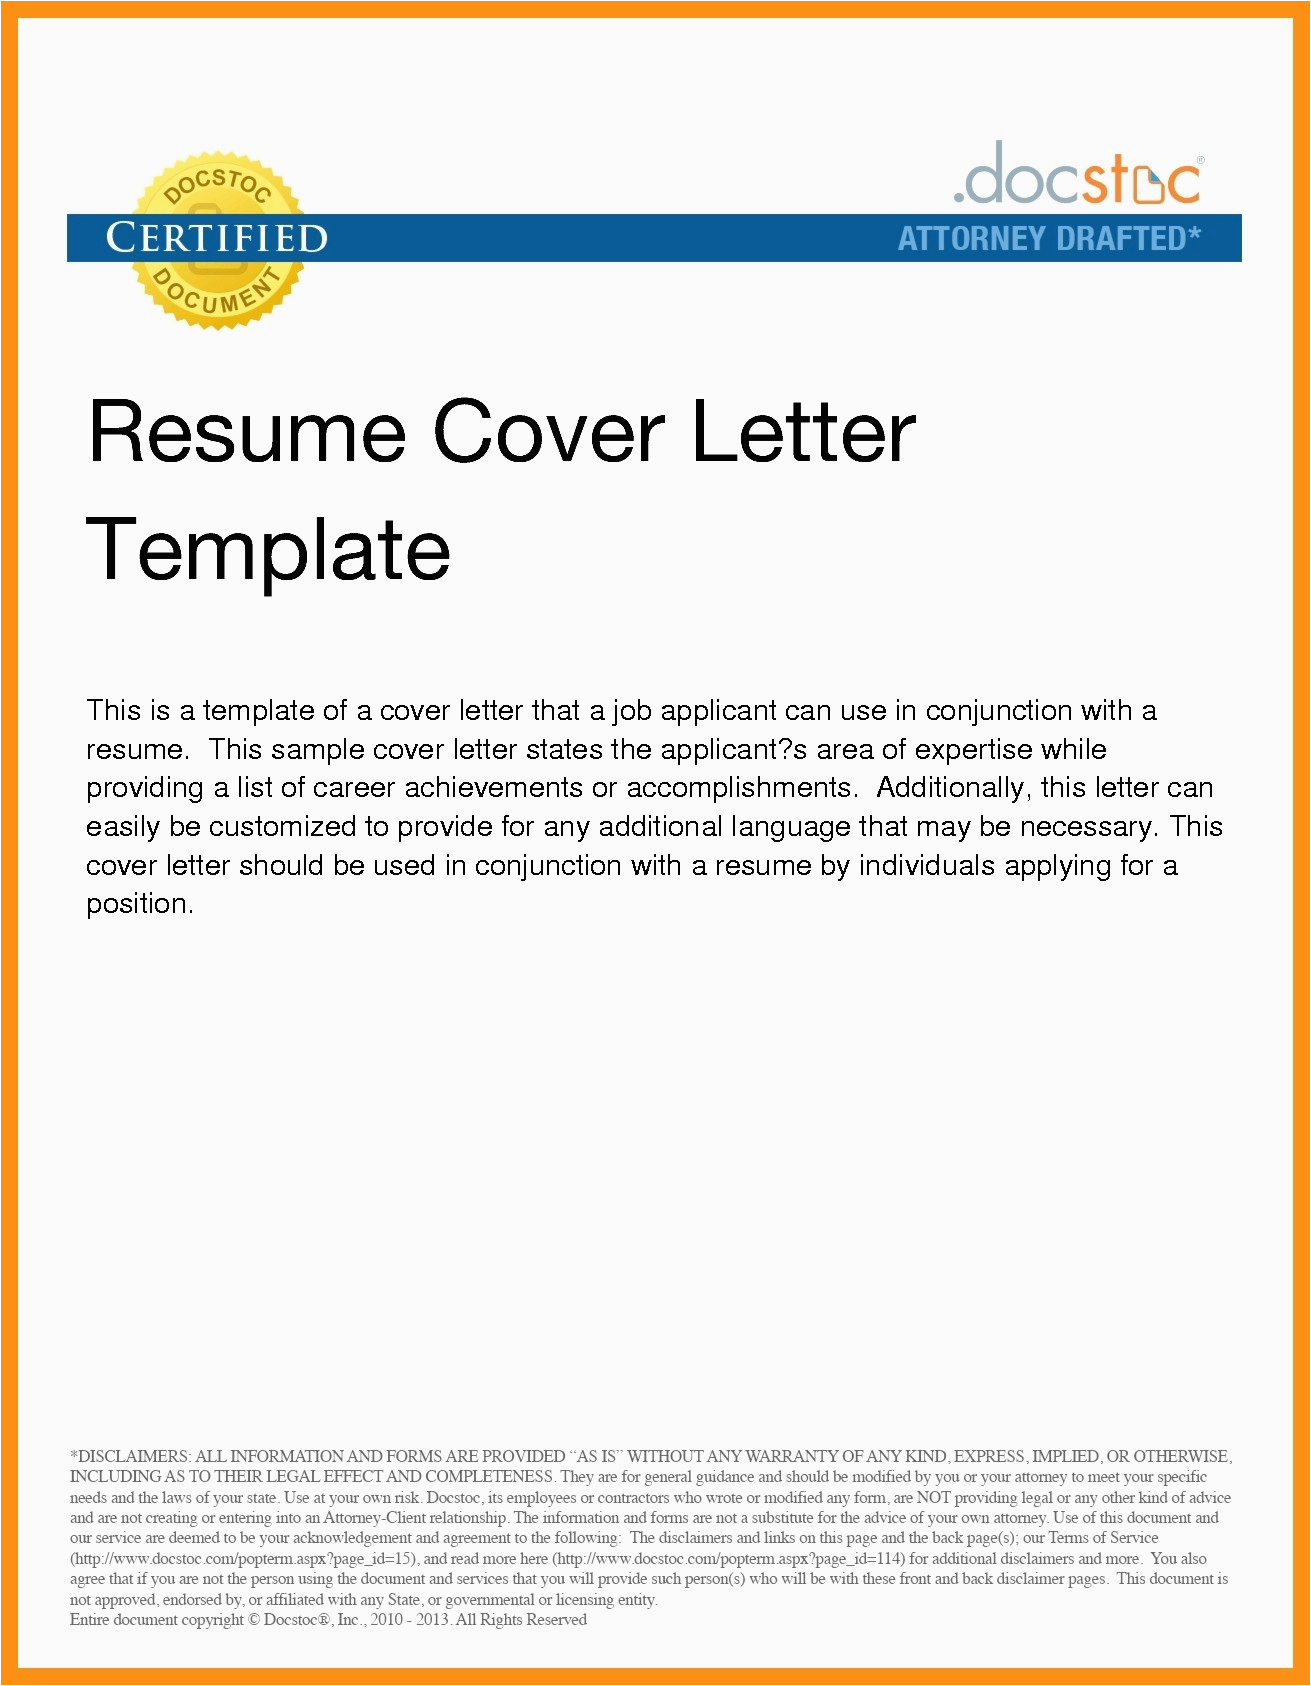 Sample Cover Letter to Send Resume In Email Sending Resume and Cover Letter by Email Collection